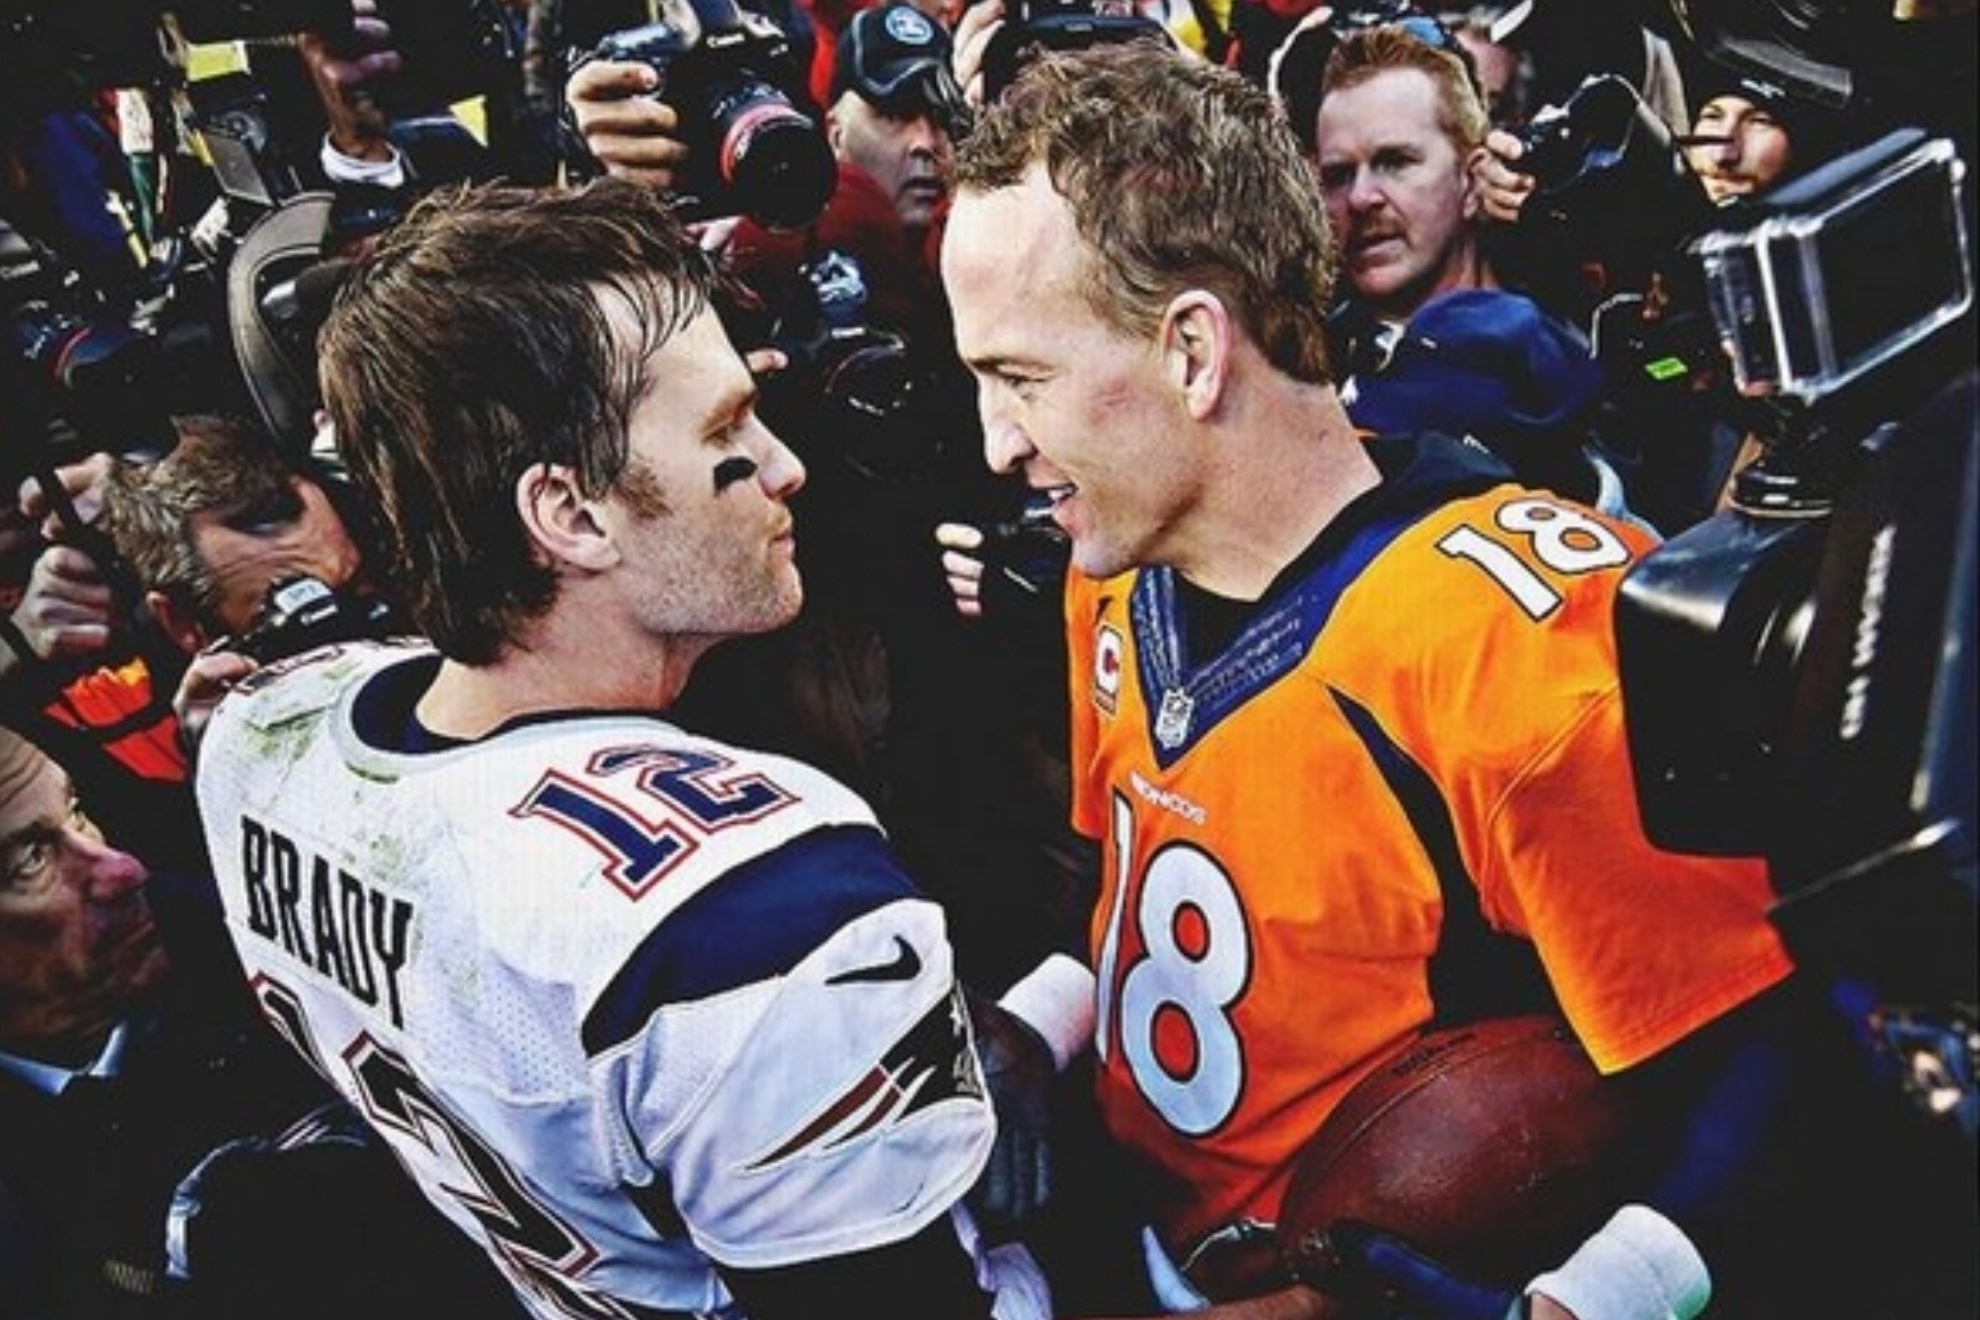 Manning beat Brady in the 2013 and 2015 AFC Championship games.